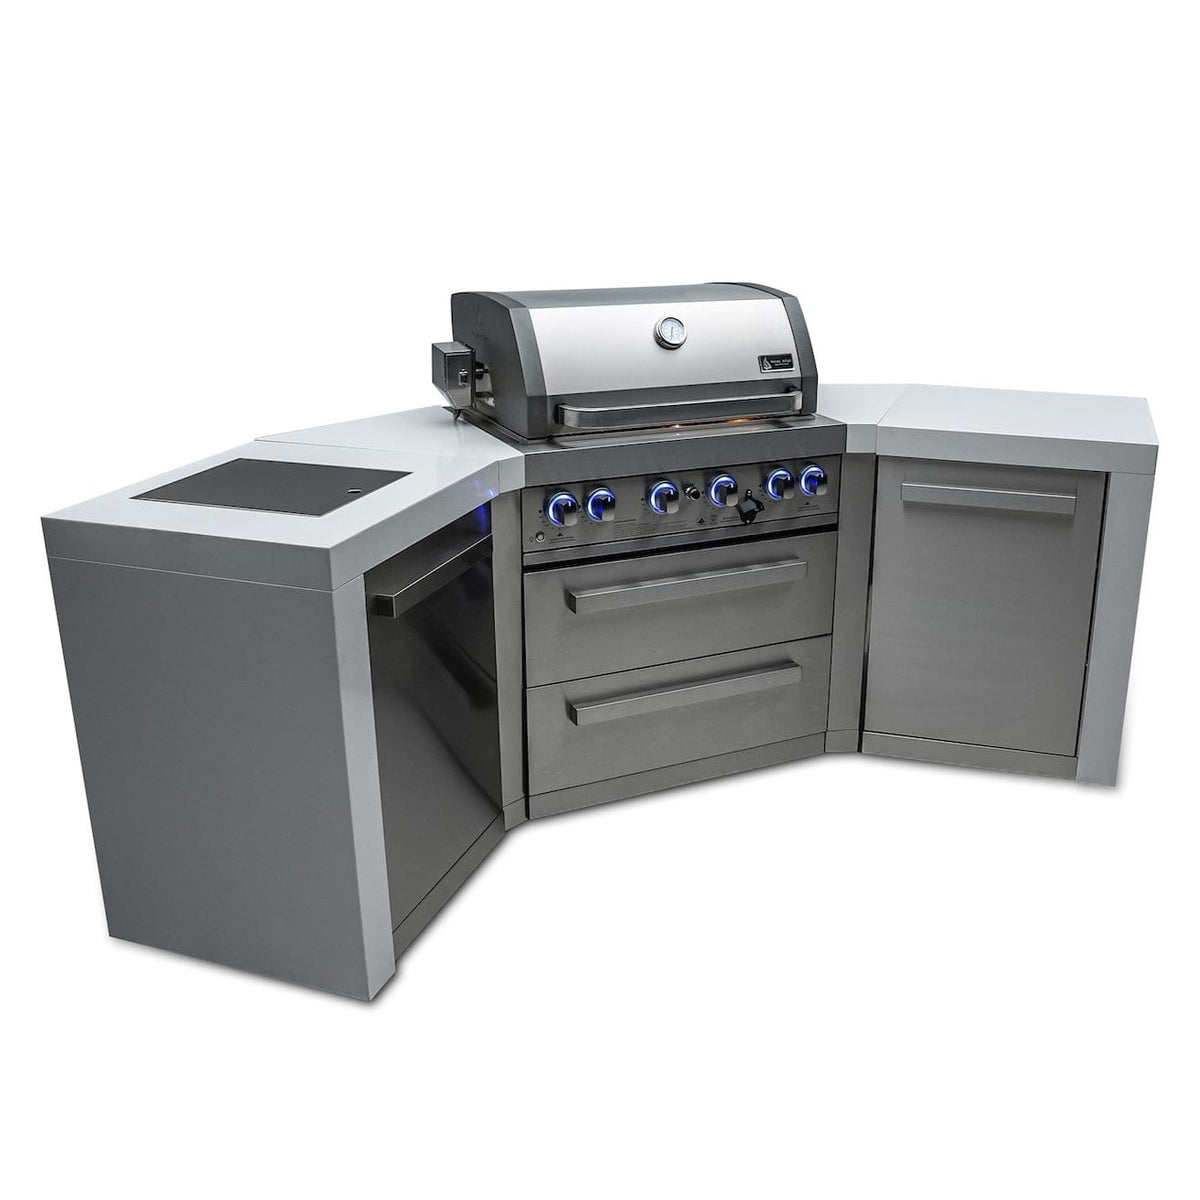 Mont Alpi Islands Mont Alpi 400 Deluxe Island with Two 45 Degree Corners / 4-Burner Grill, 2 Infrared Burners, Stainless Steel, Cover / MAi400-D45